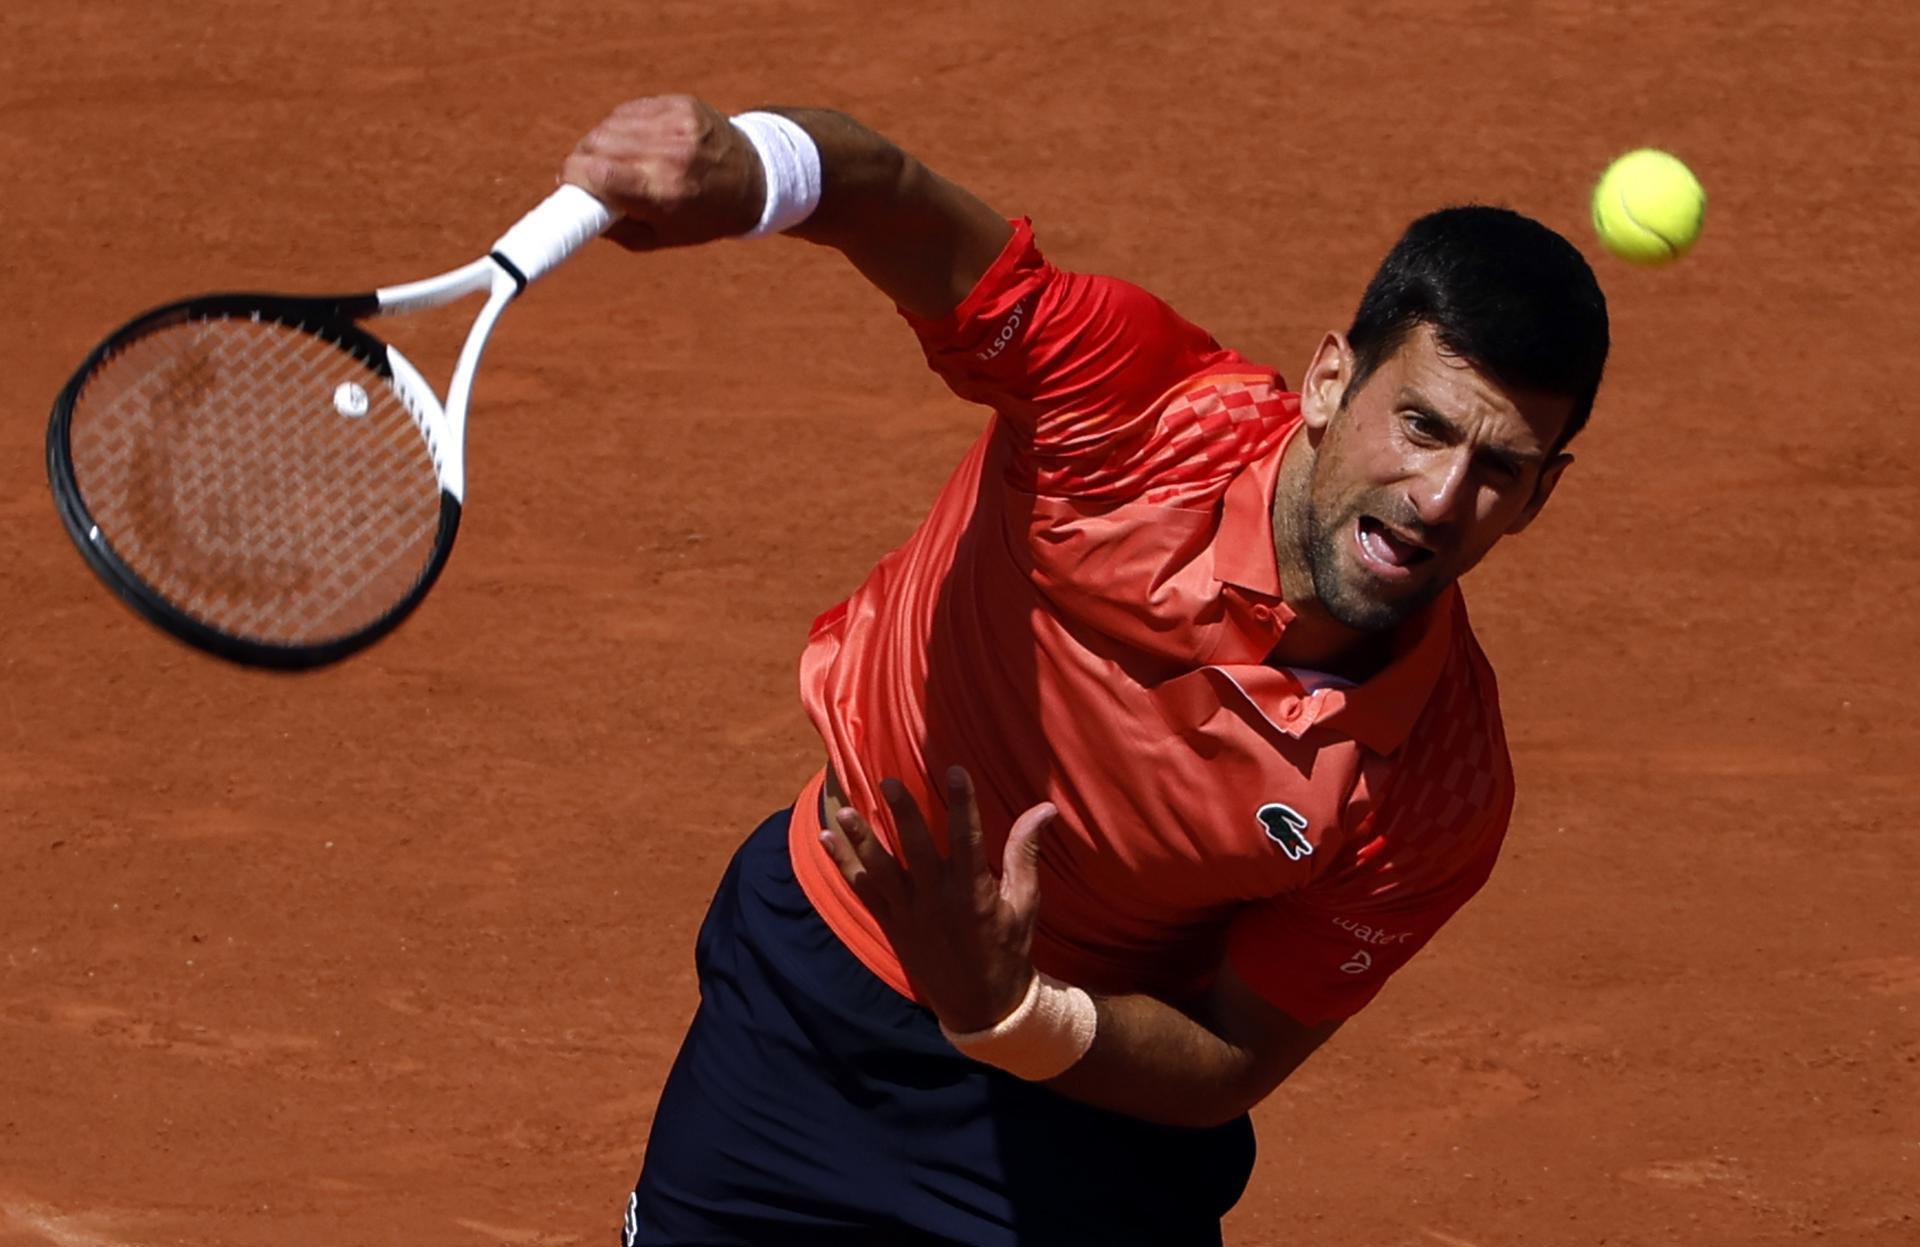 Serbian great Novak Djokovic hits a serve during his French Open first-round match against Aleksandar Kovacevic of the United States on 29 May 2023 in Paris, France. Djokovic won 6-3, 6-2, 7-6 (7-1). EFE/EPA/YOAN VALAT
